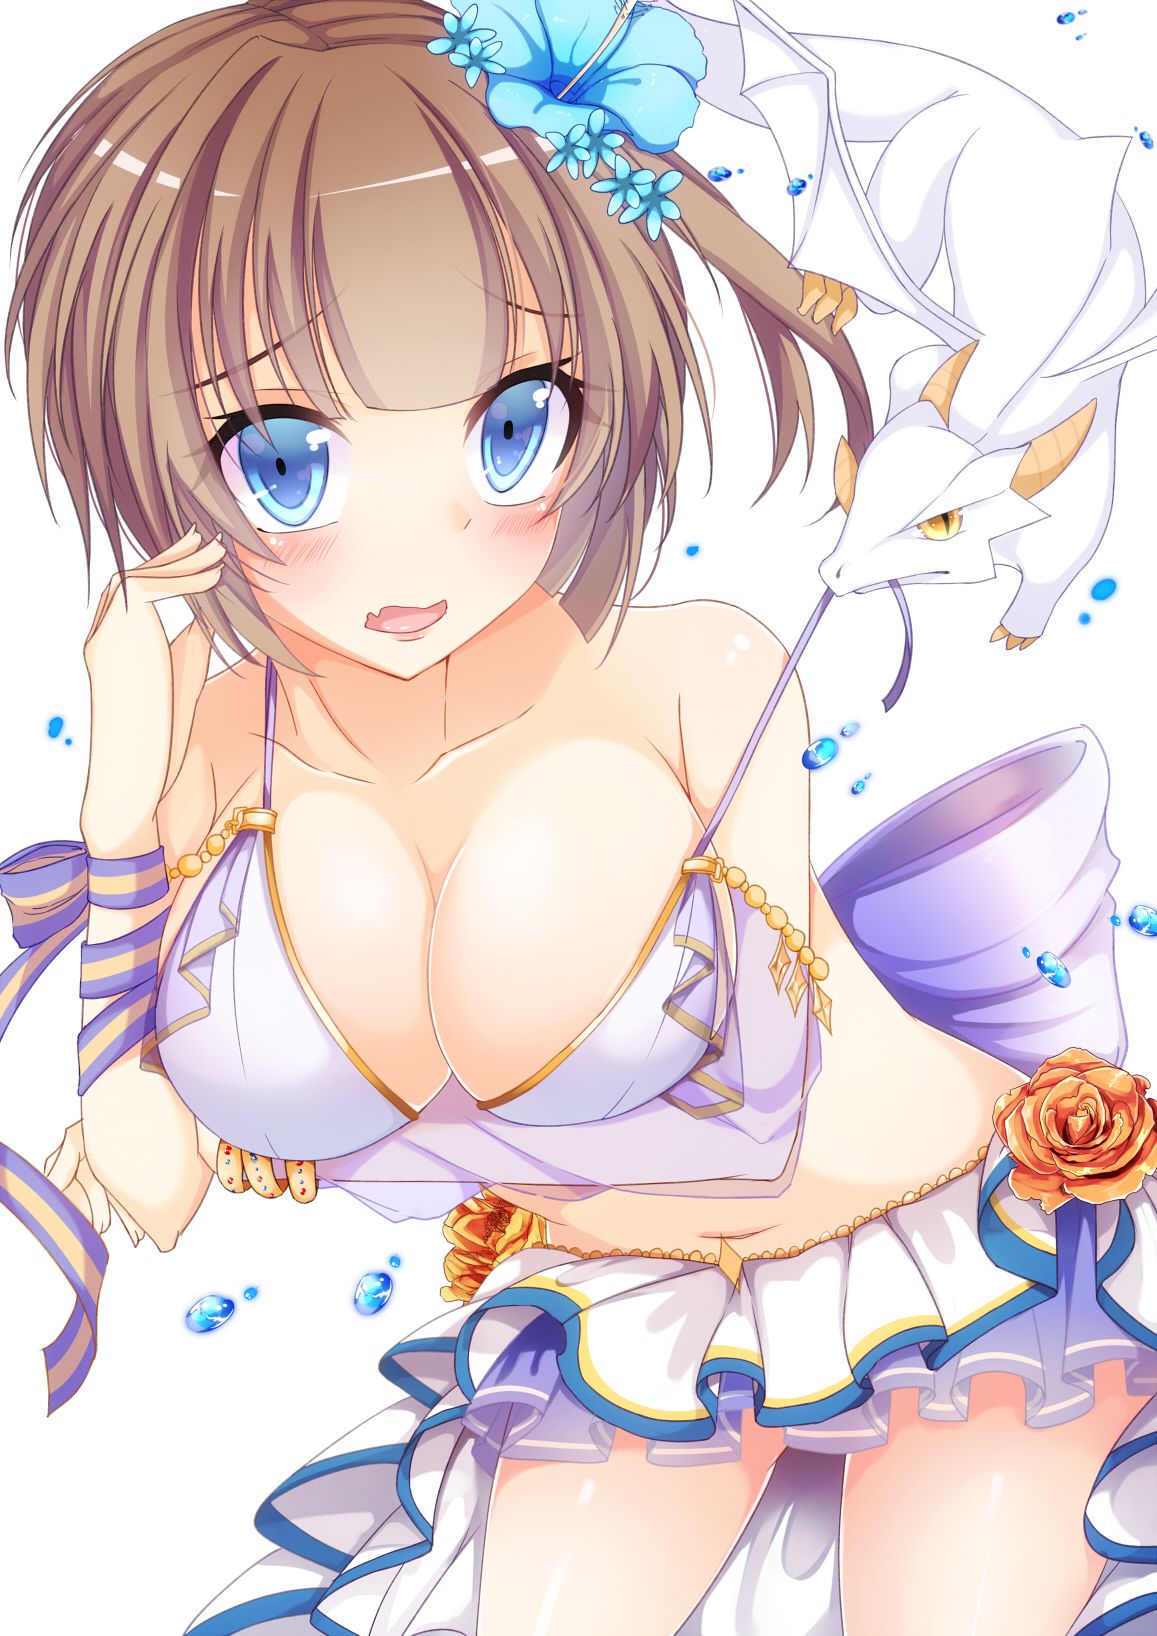 [34 pieces] Because princess エクセリア of the country of the dragon of the white cat project too has a cute breast; just … 33